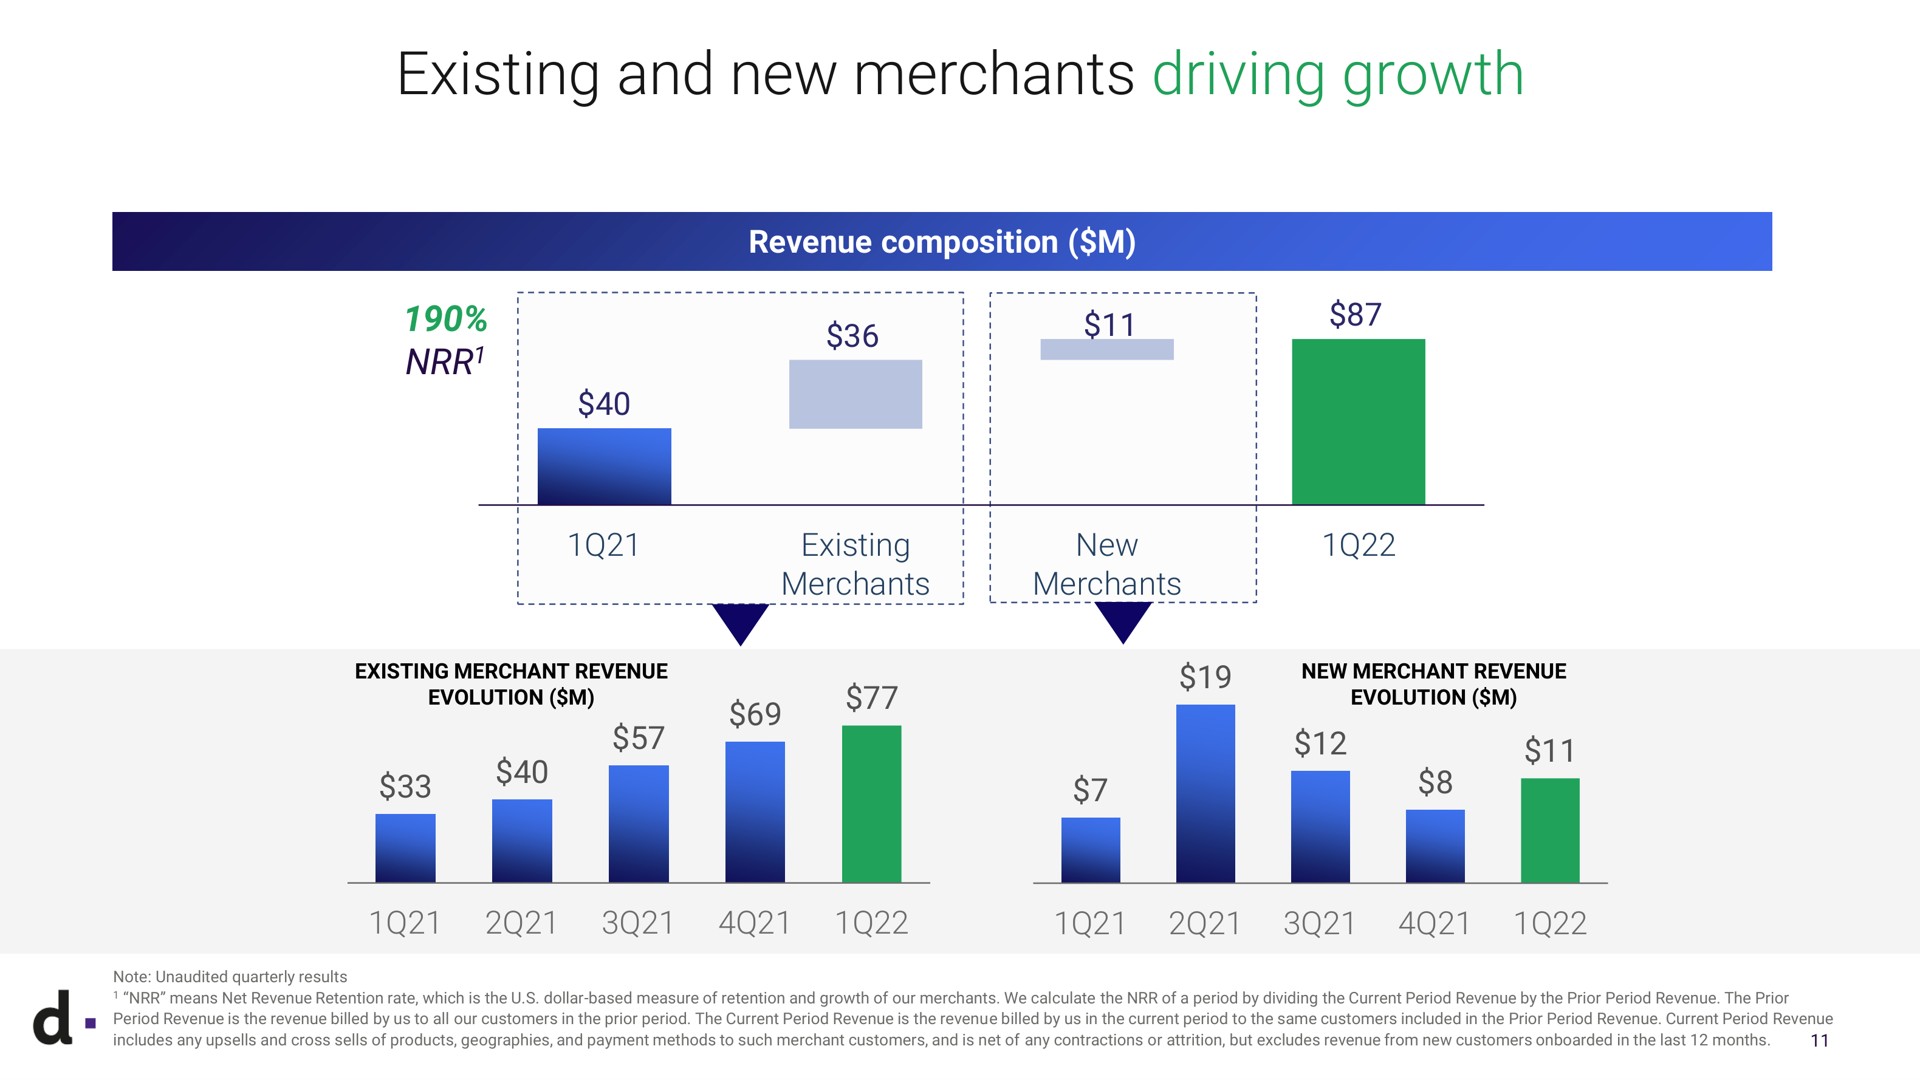 existing and new merchants driving growth revenue composition i merchant revenue men merchant revenue evolution a note unaudited quarterly results means net revenue retention rate which is the dollar based measure of retention of our we calculate the of a period by dividing the current period revenue by the prior period revenue the prior period revenue is the revenue billed by us to all our customers in the prior period the current period revenue is the revenue billed by us in the current period to the same customers included in the prior period revenue current period revenue includes any cross sells of products geographies payment methods to such merchant customers is net of any contractions or attrition but excludes revenue from customers in the last months | dLocal